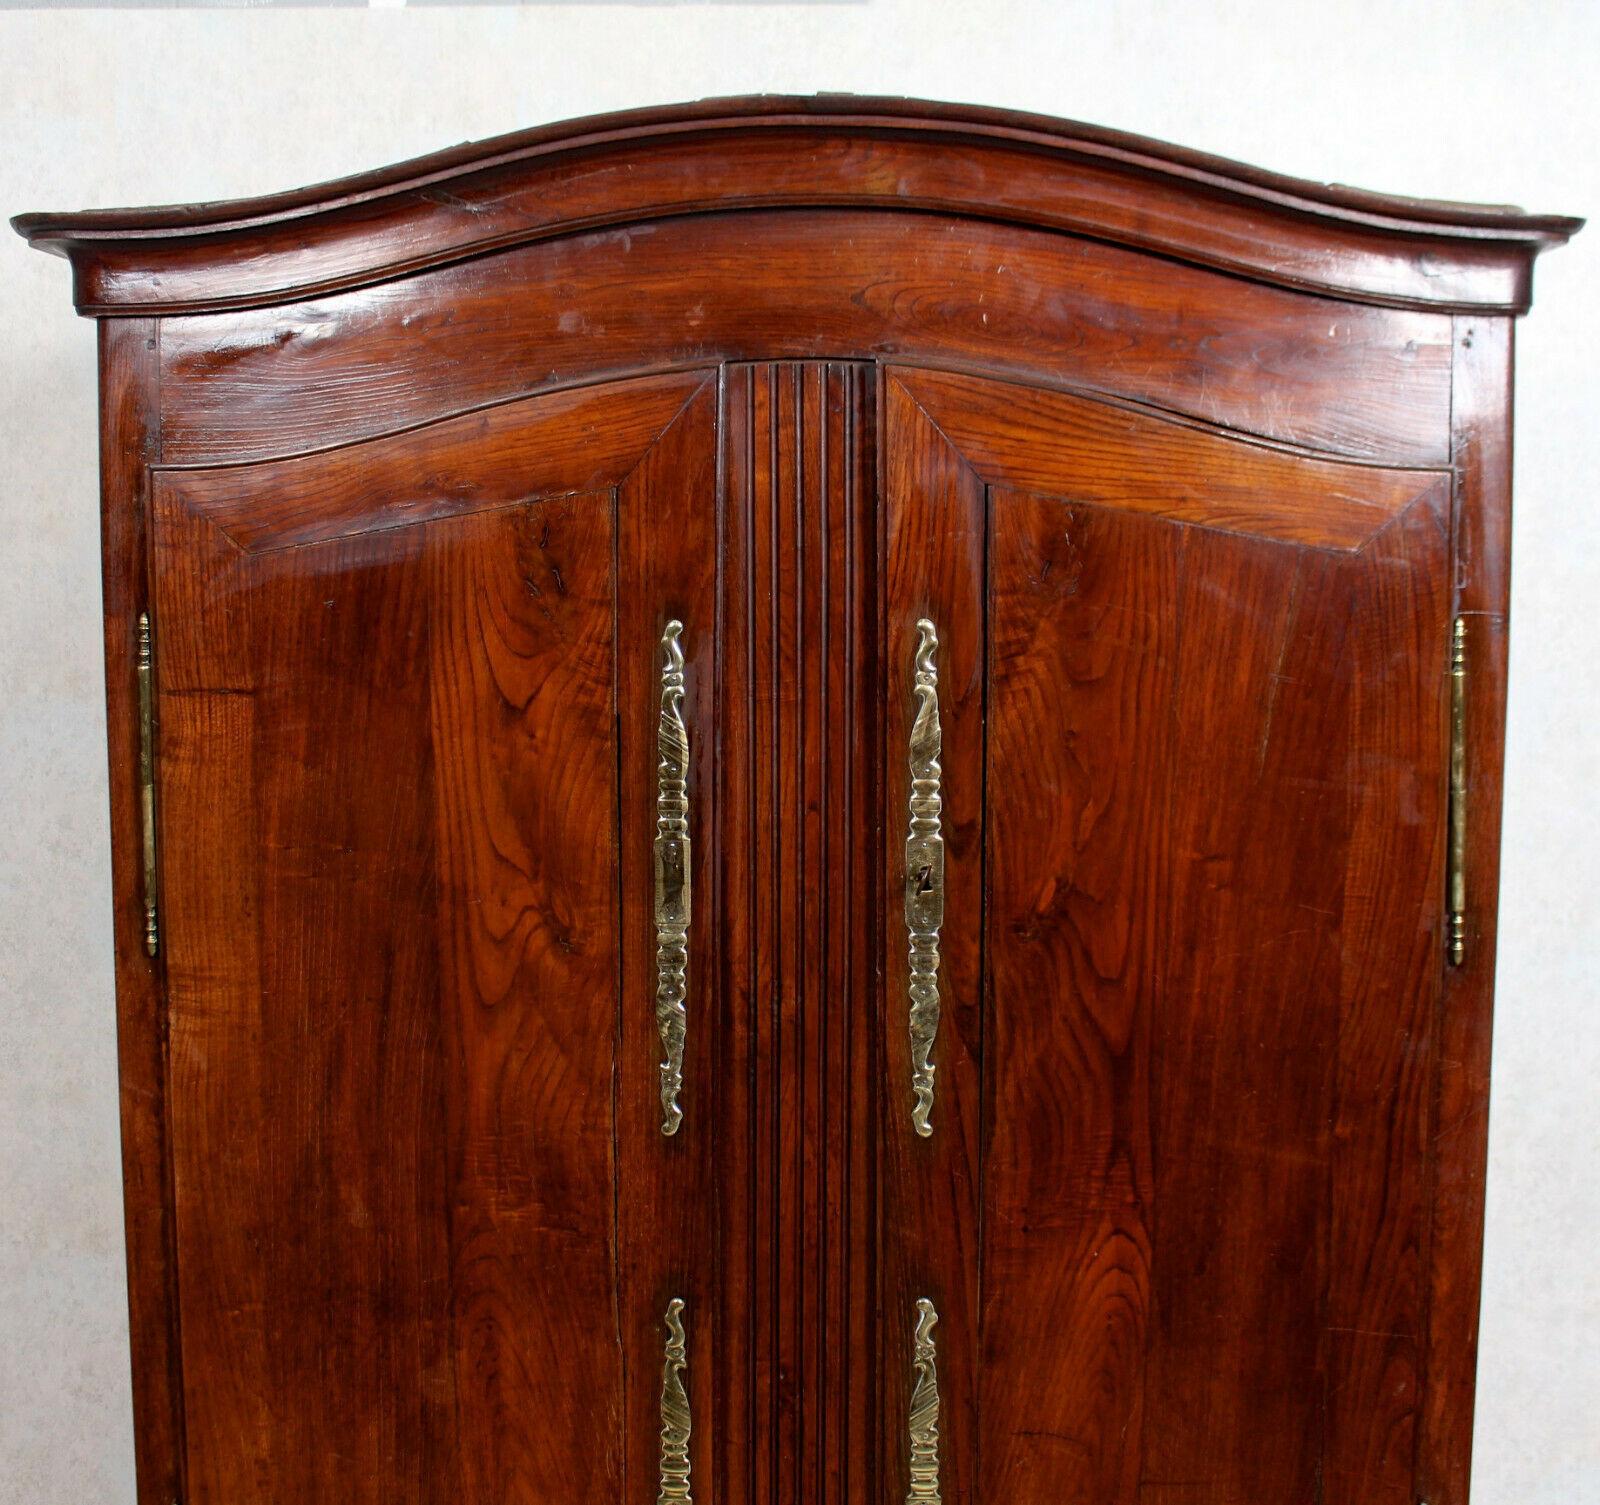 An impressive 19th century French cherrywood armoire.

Beautifully proportioned with a gracefully arched cornice and carved squat cabriole legs. The paneled doors enclosed a hanging rail running the width, shelving and a extending hanging rail